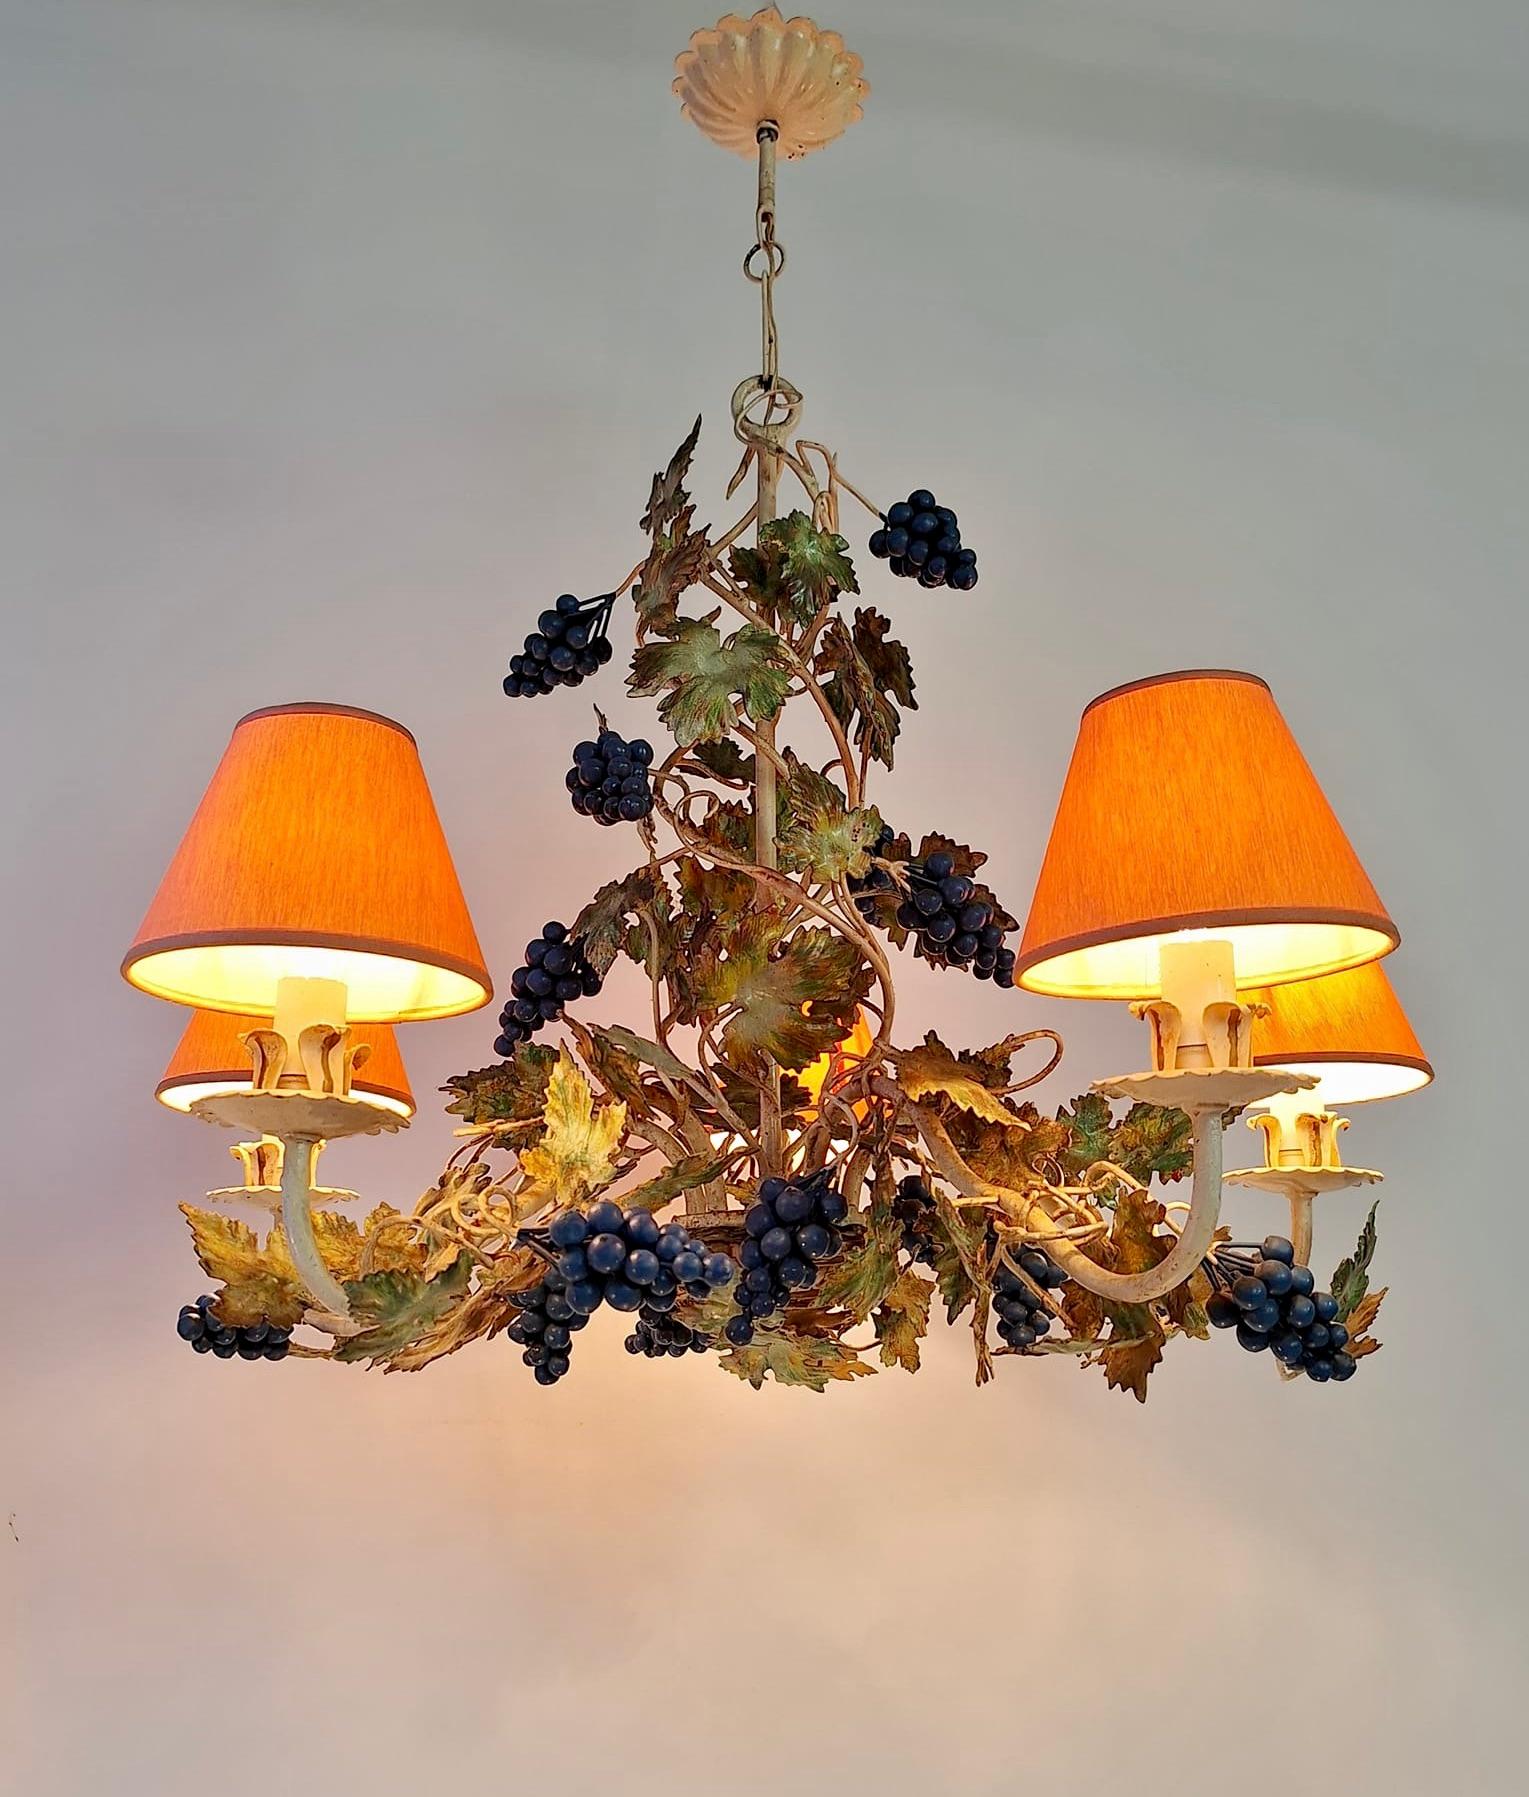 A wonderful Italian 1950's white iron 5 candelabra light chandelier. This beautiful chandelier consists of a gracefully scrolled iron frame with an assortment of colored leaves and grape clusters. 

